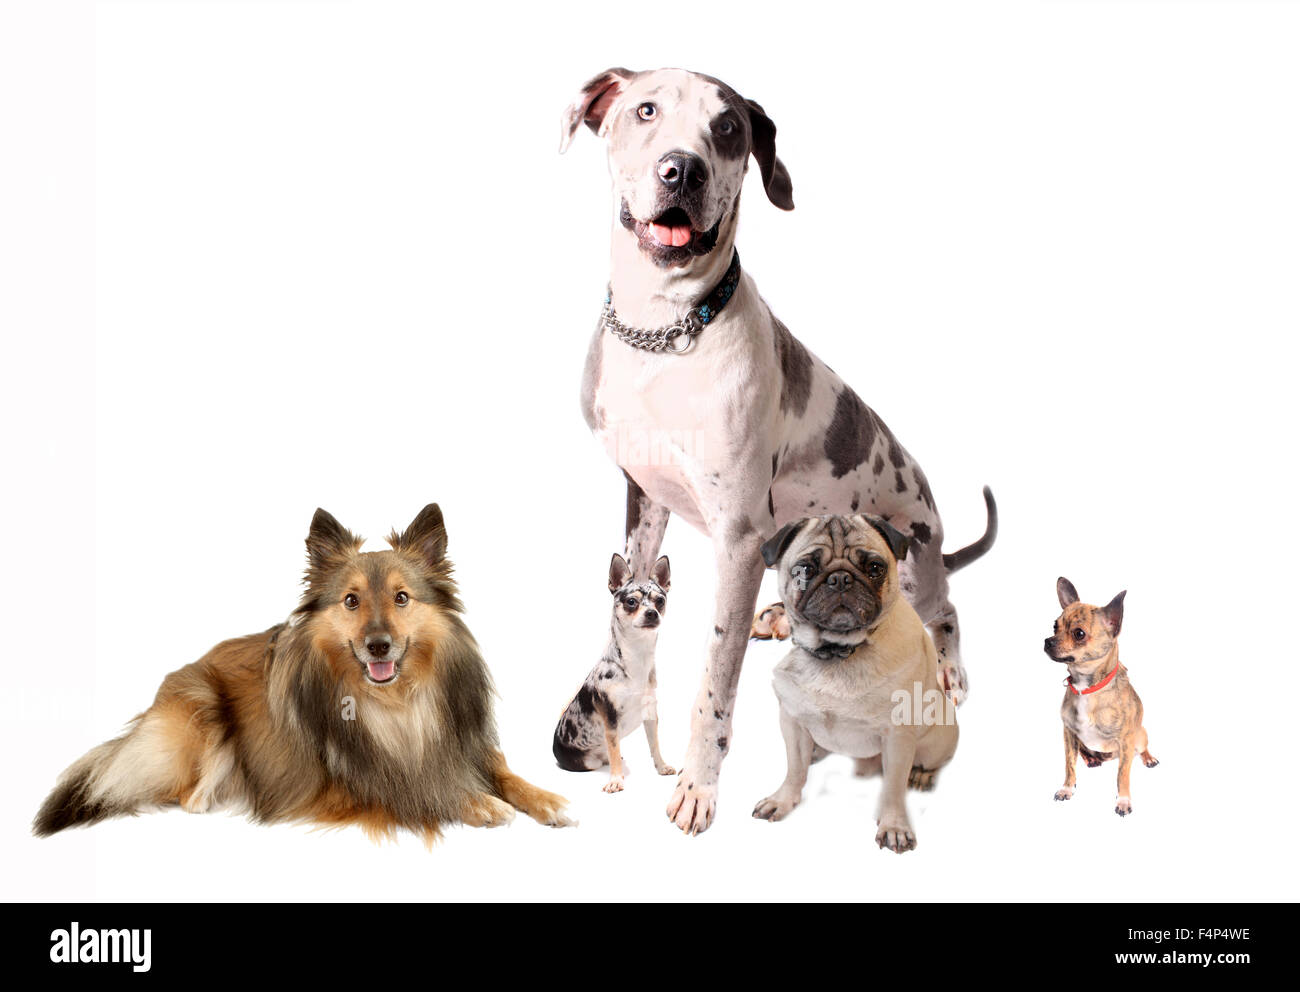 Different breeds of dogs like Chihuahuas, Great Dane, Sheltie, and Pug sitting together on a white background Stock Photo